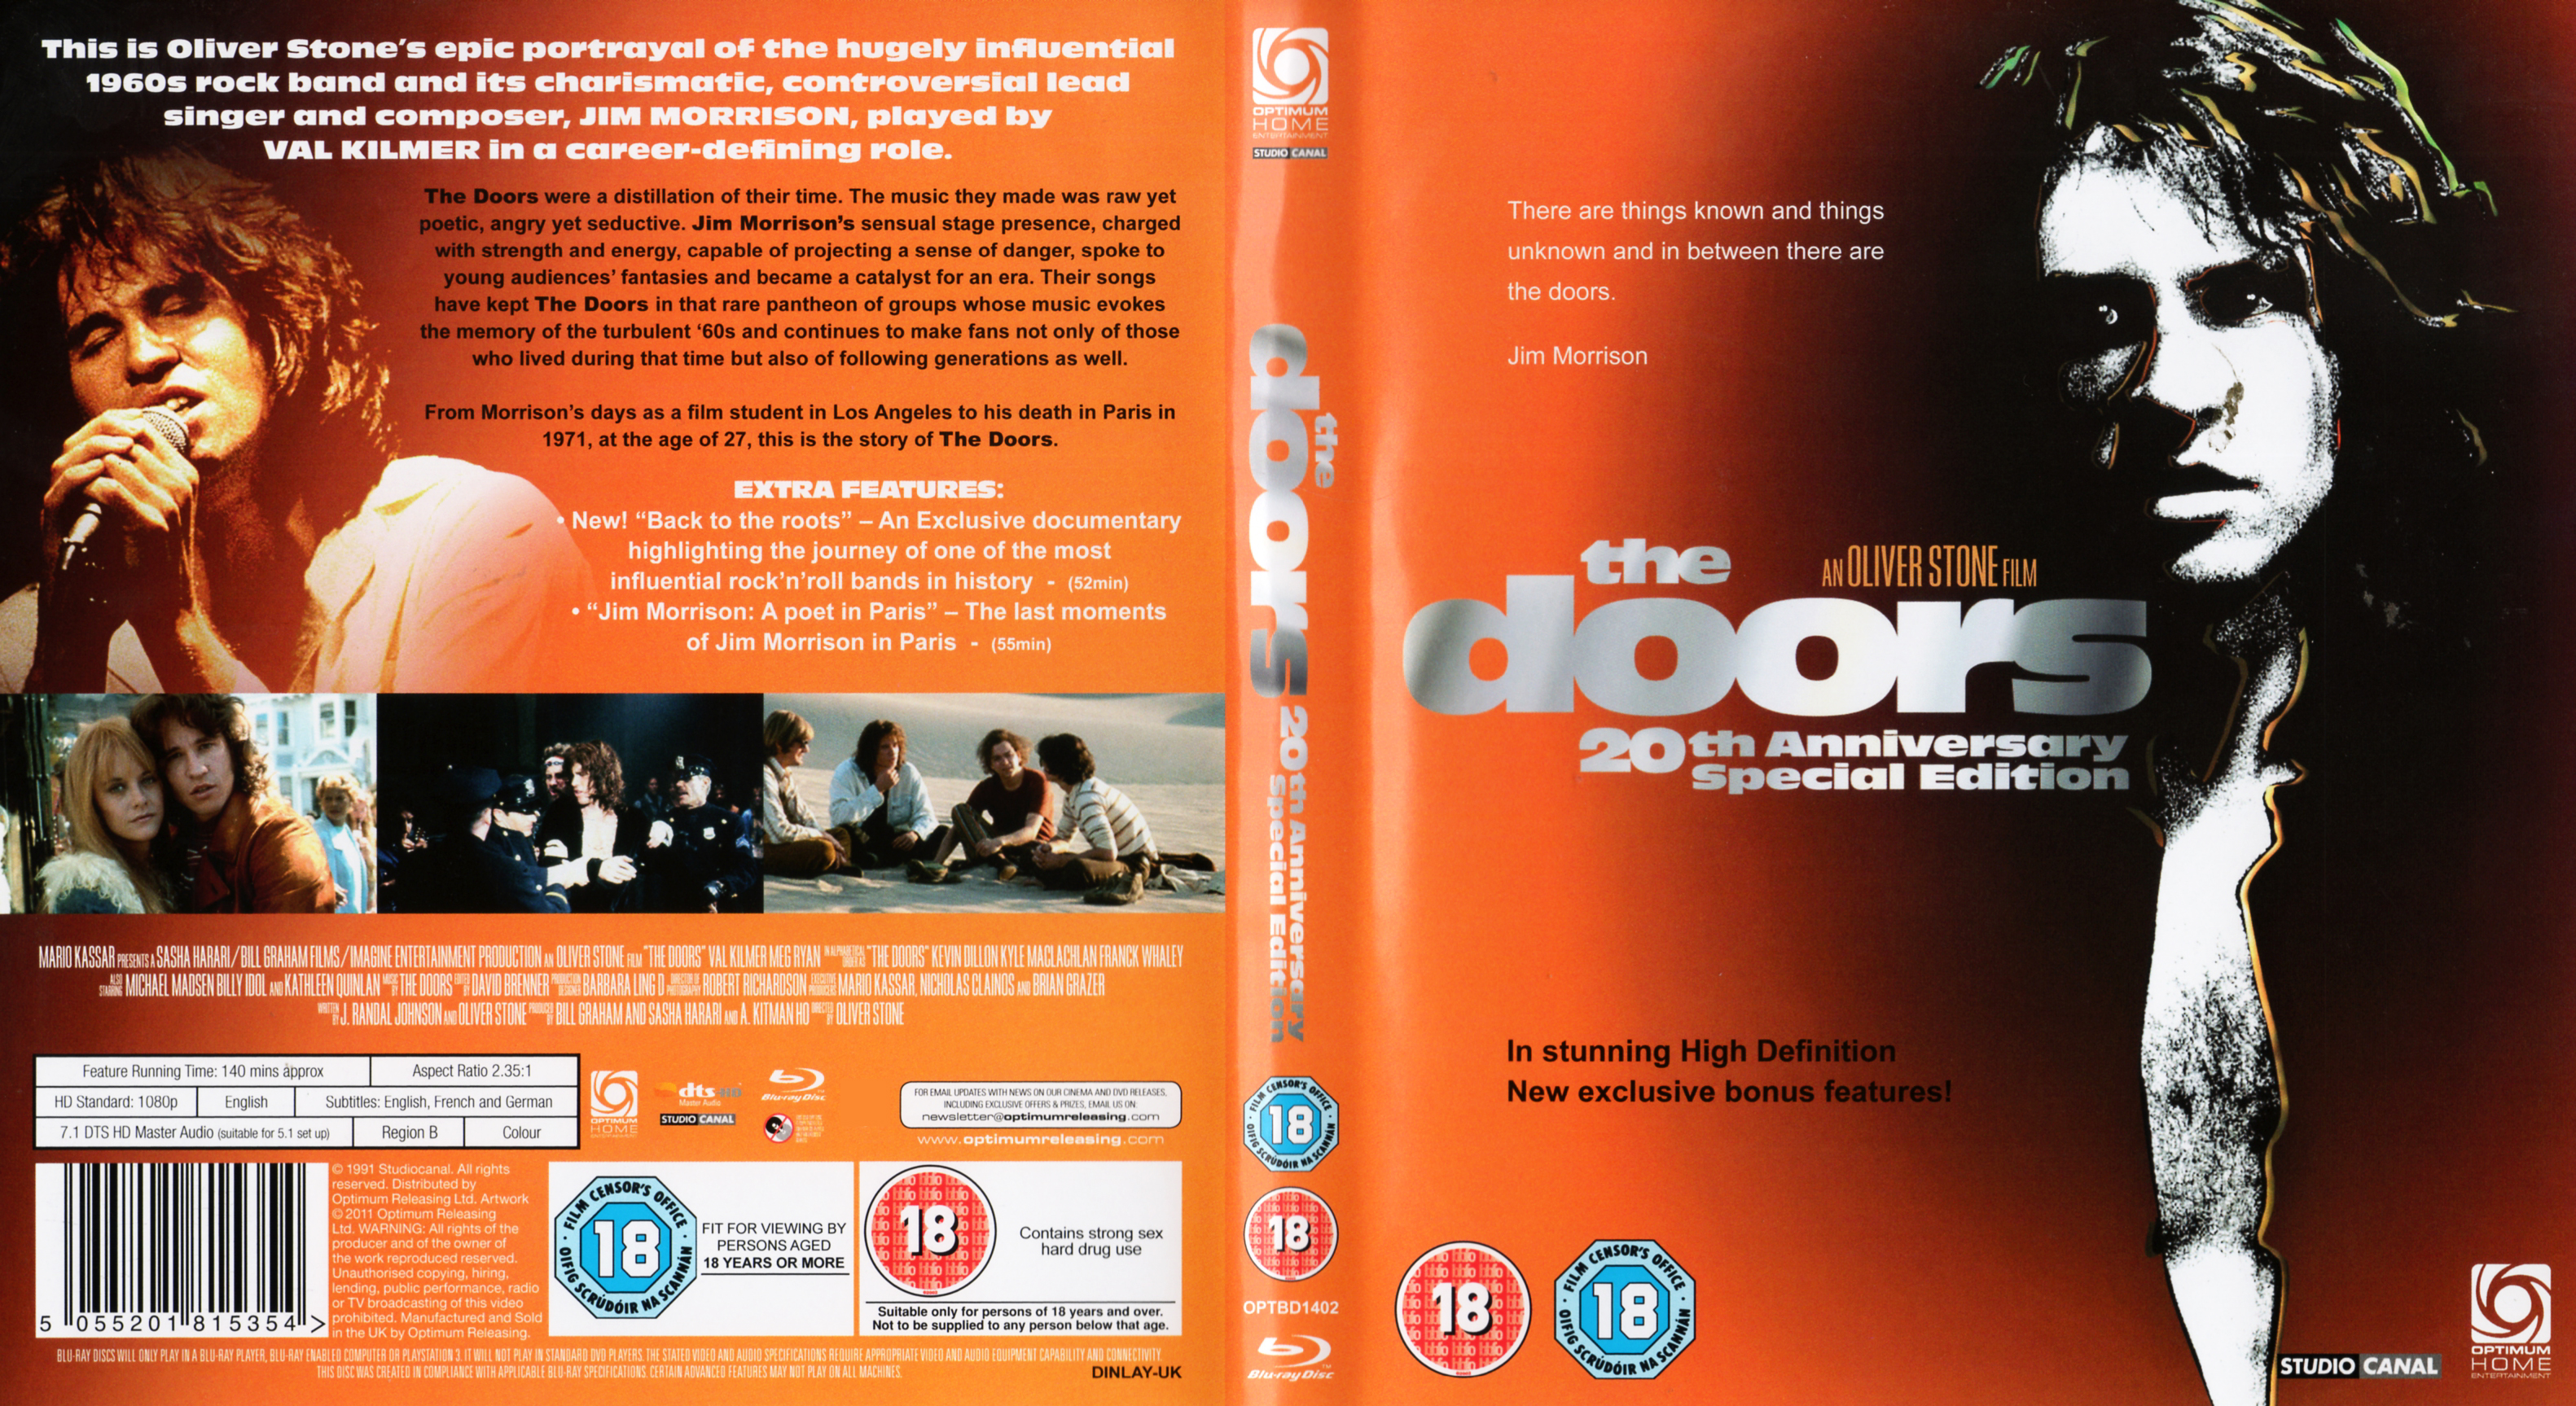 Jaquette DVD The Doors Zone 1 (BLU-RAY)